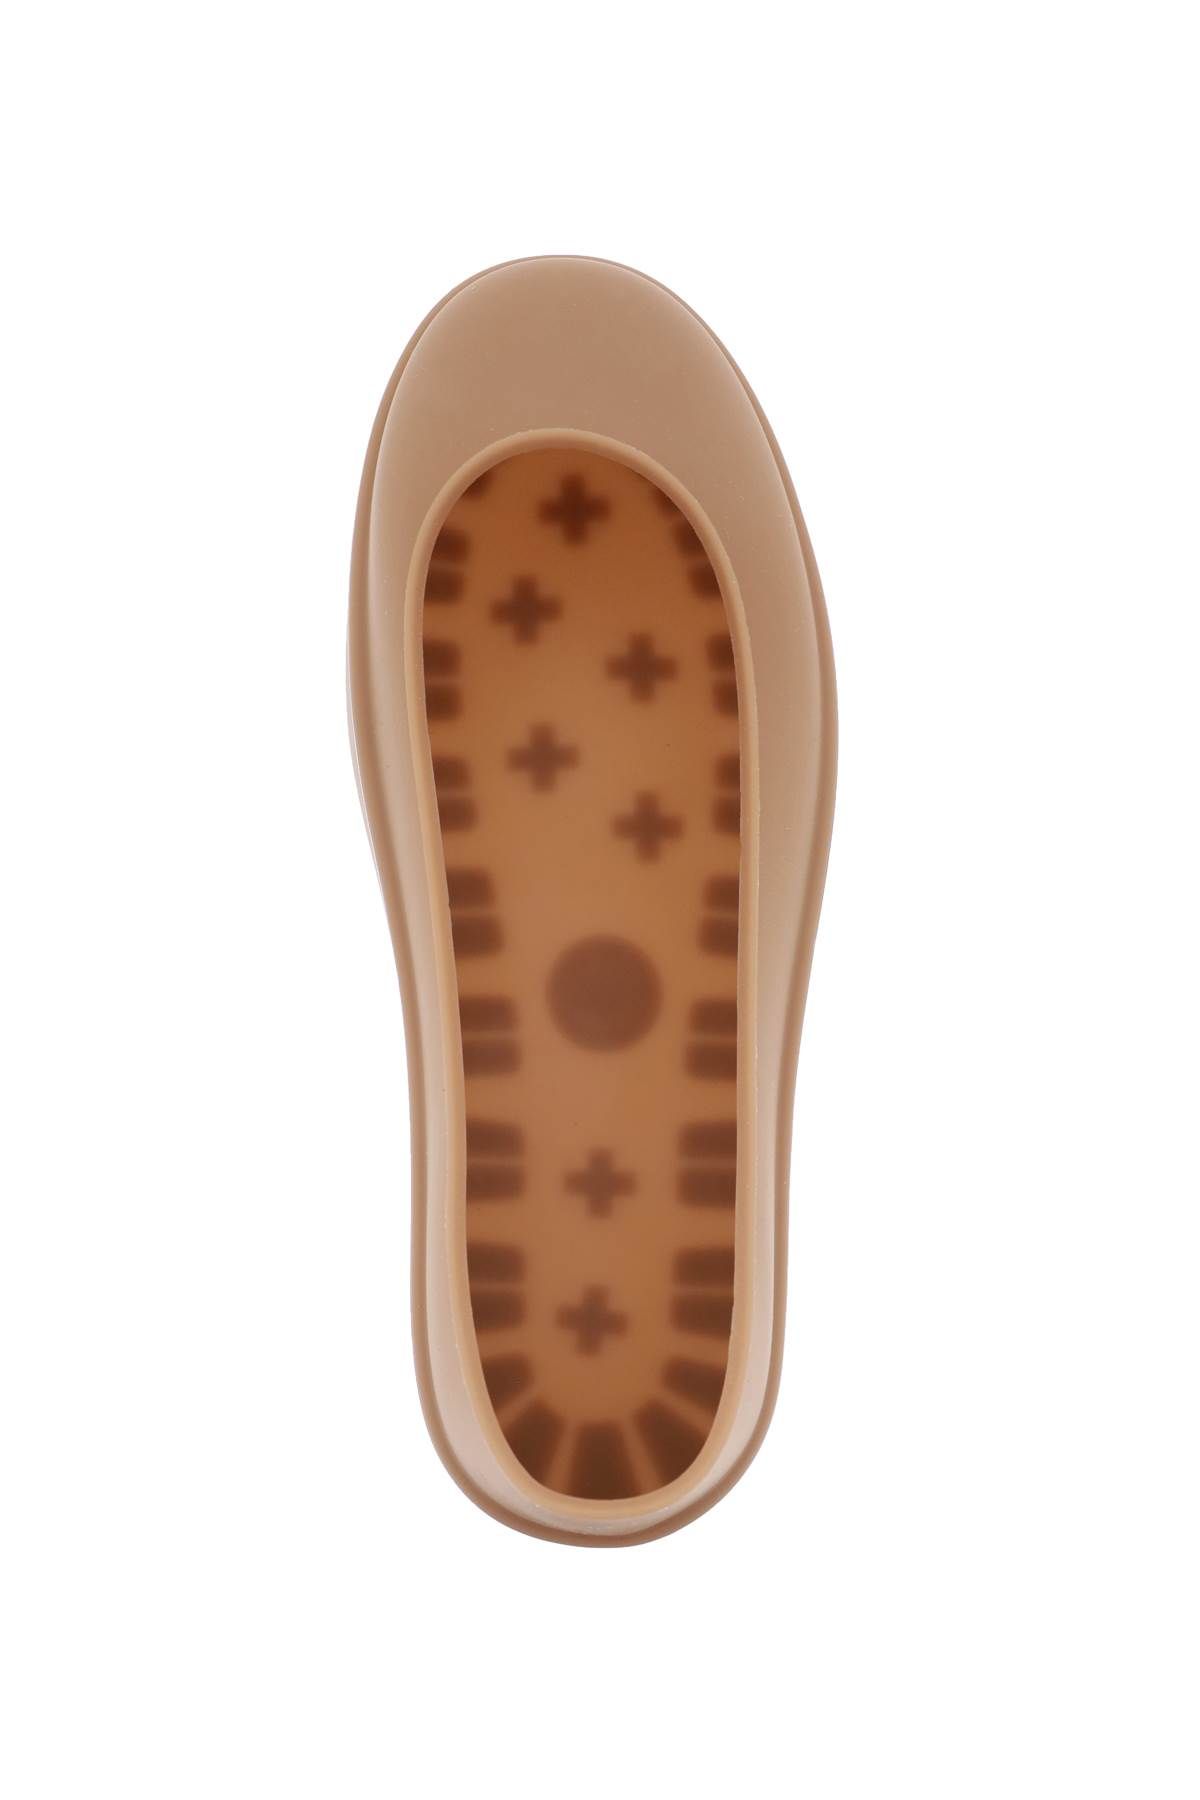 Shop Ugg Guard Shoe Protection In Brown